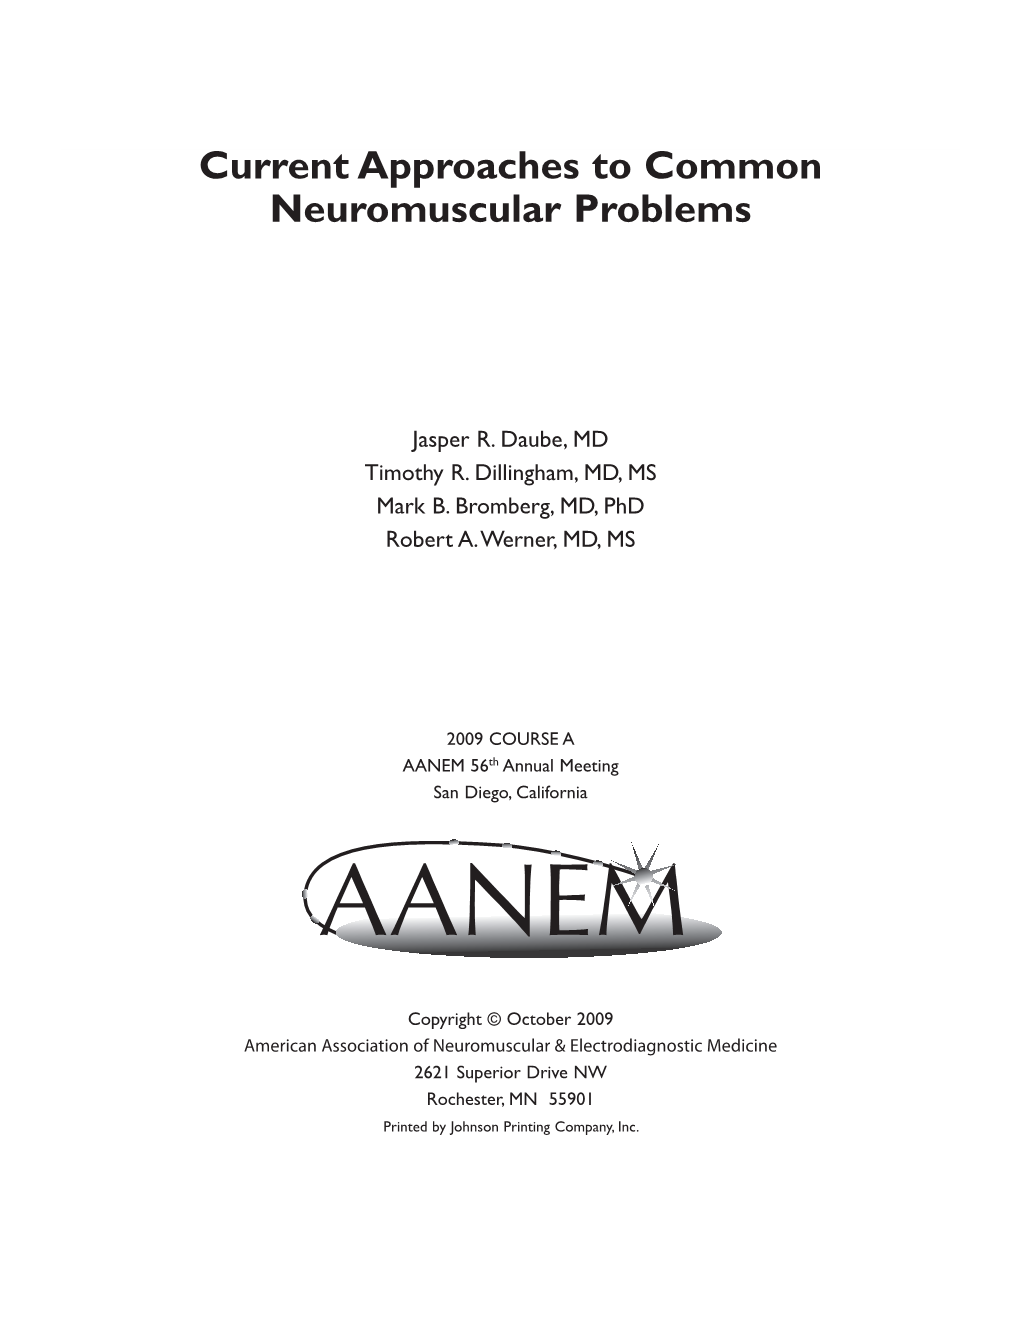 Current Approaches to Common Neuromuscular Problems